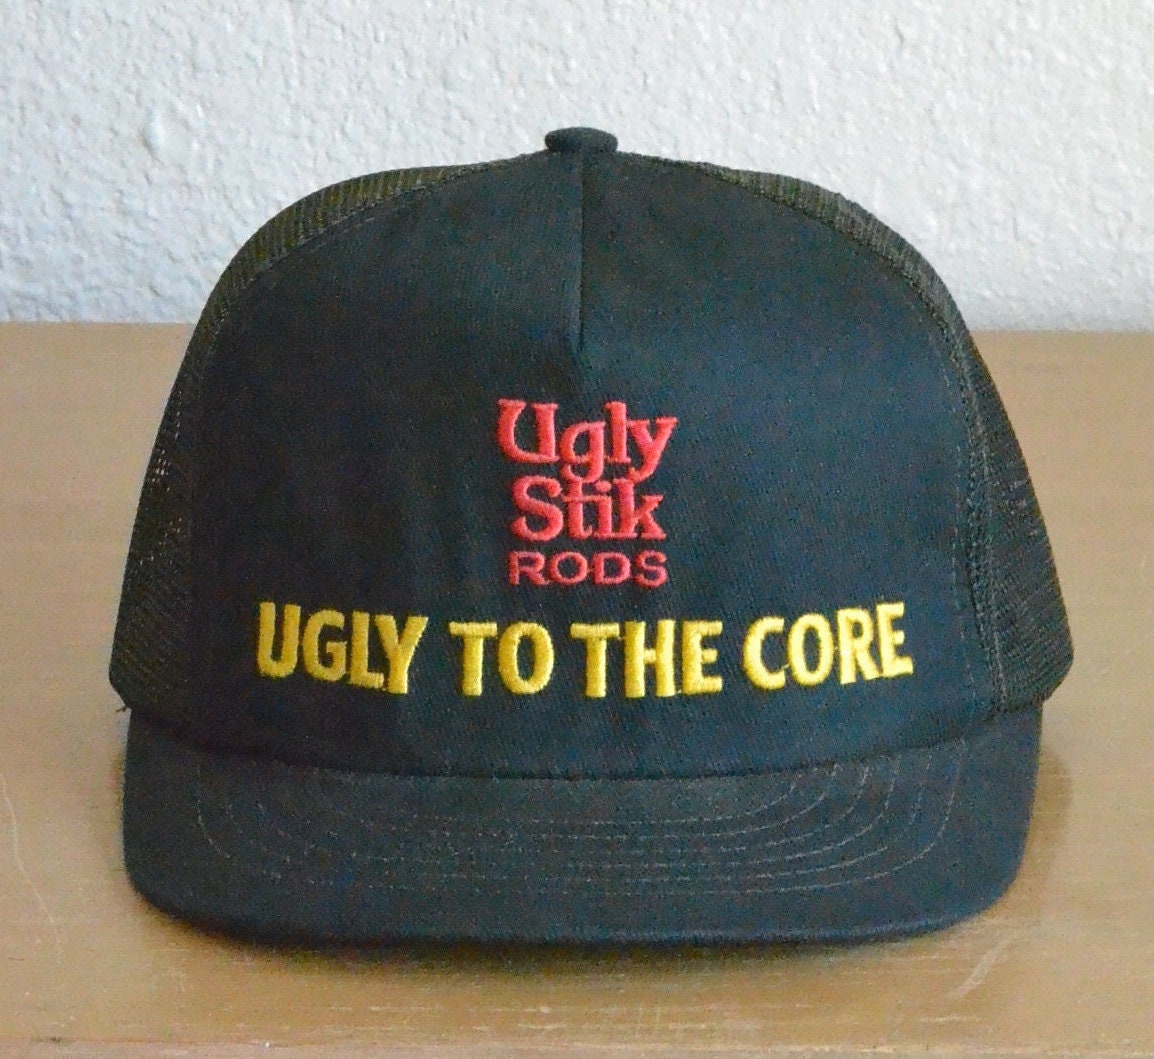 Vintage Ugly Stik Rods Ugly to the Core Trucker Hat made in U.S.A. 